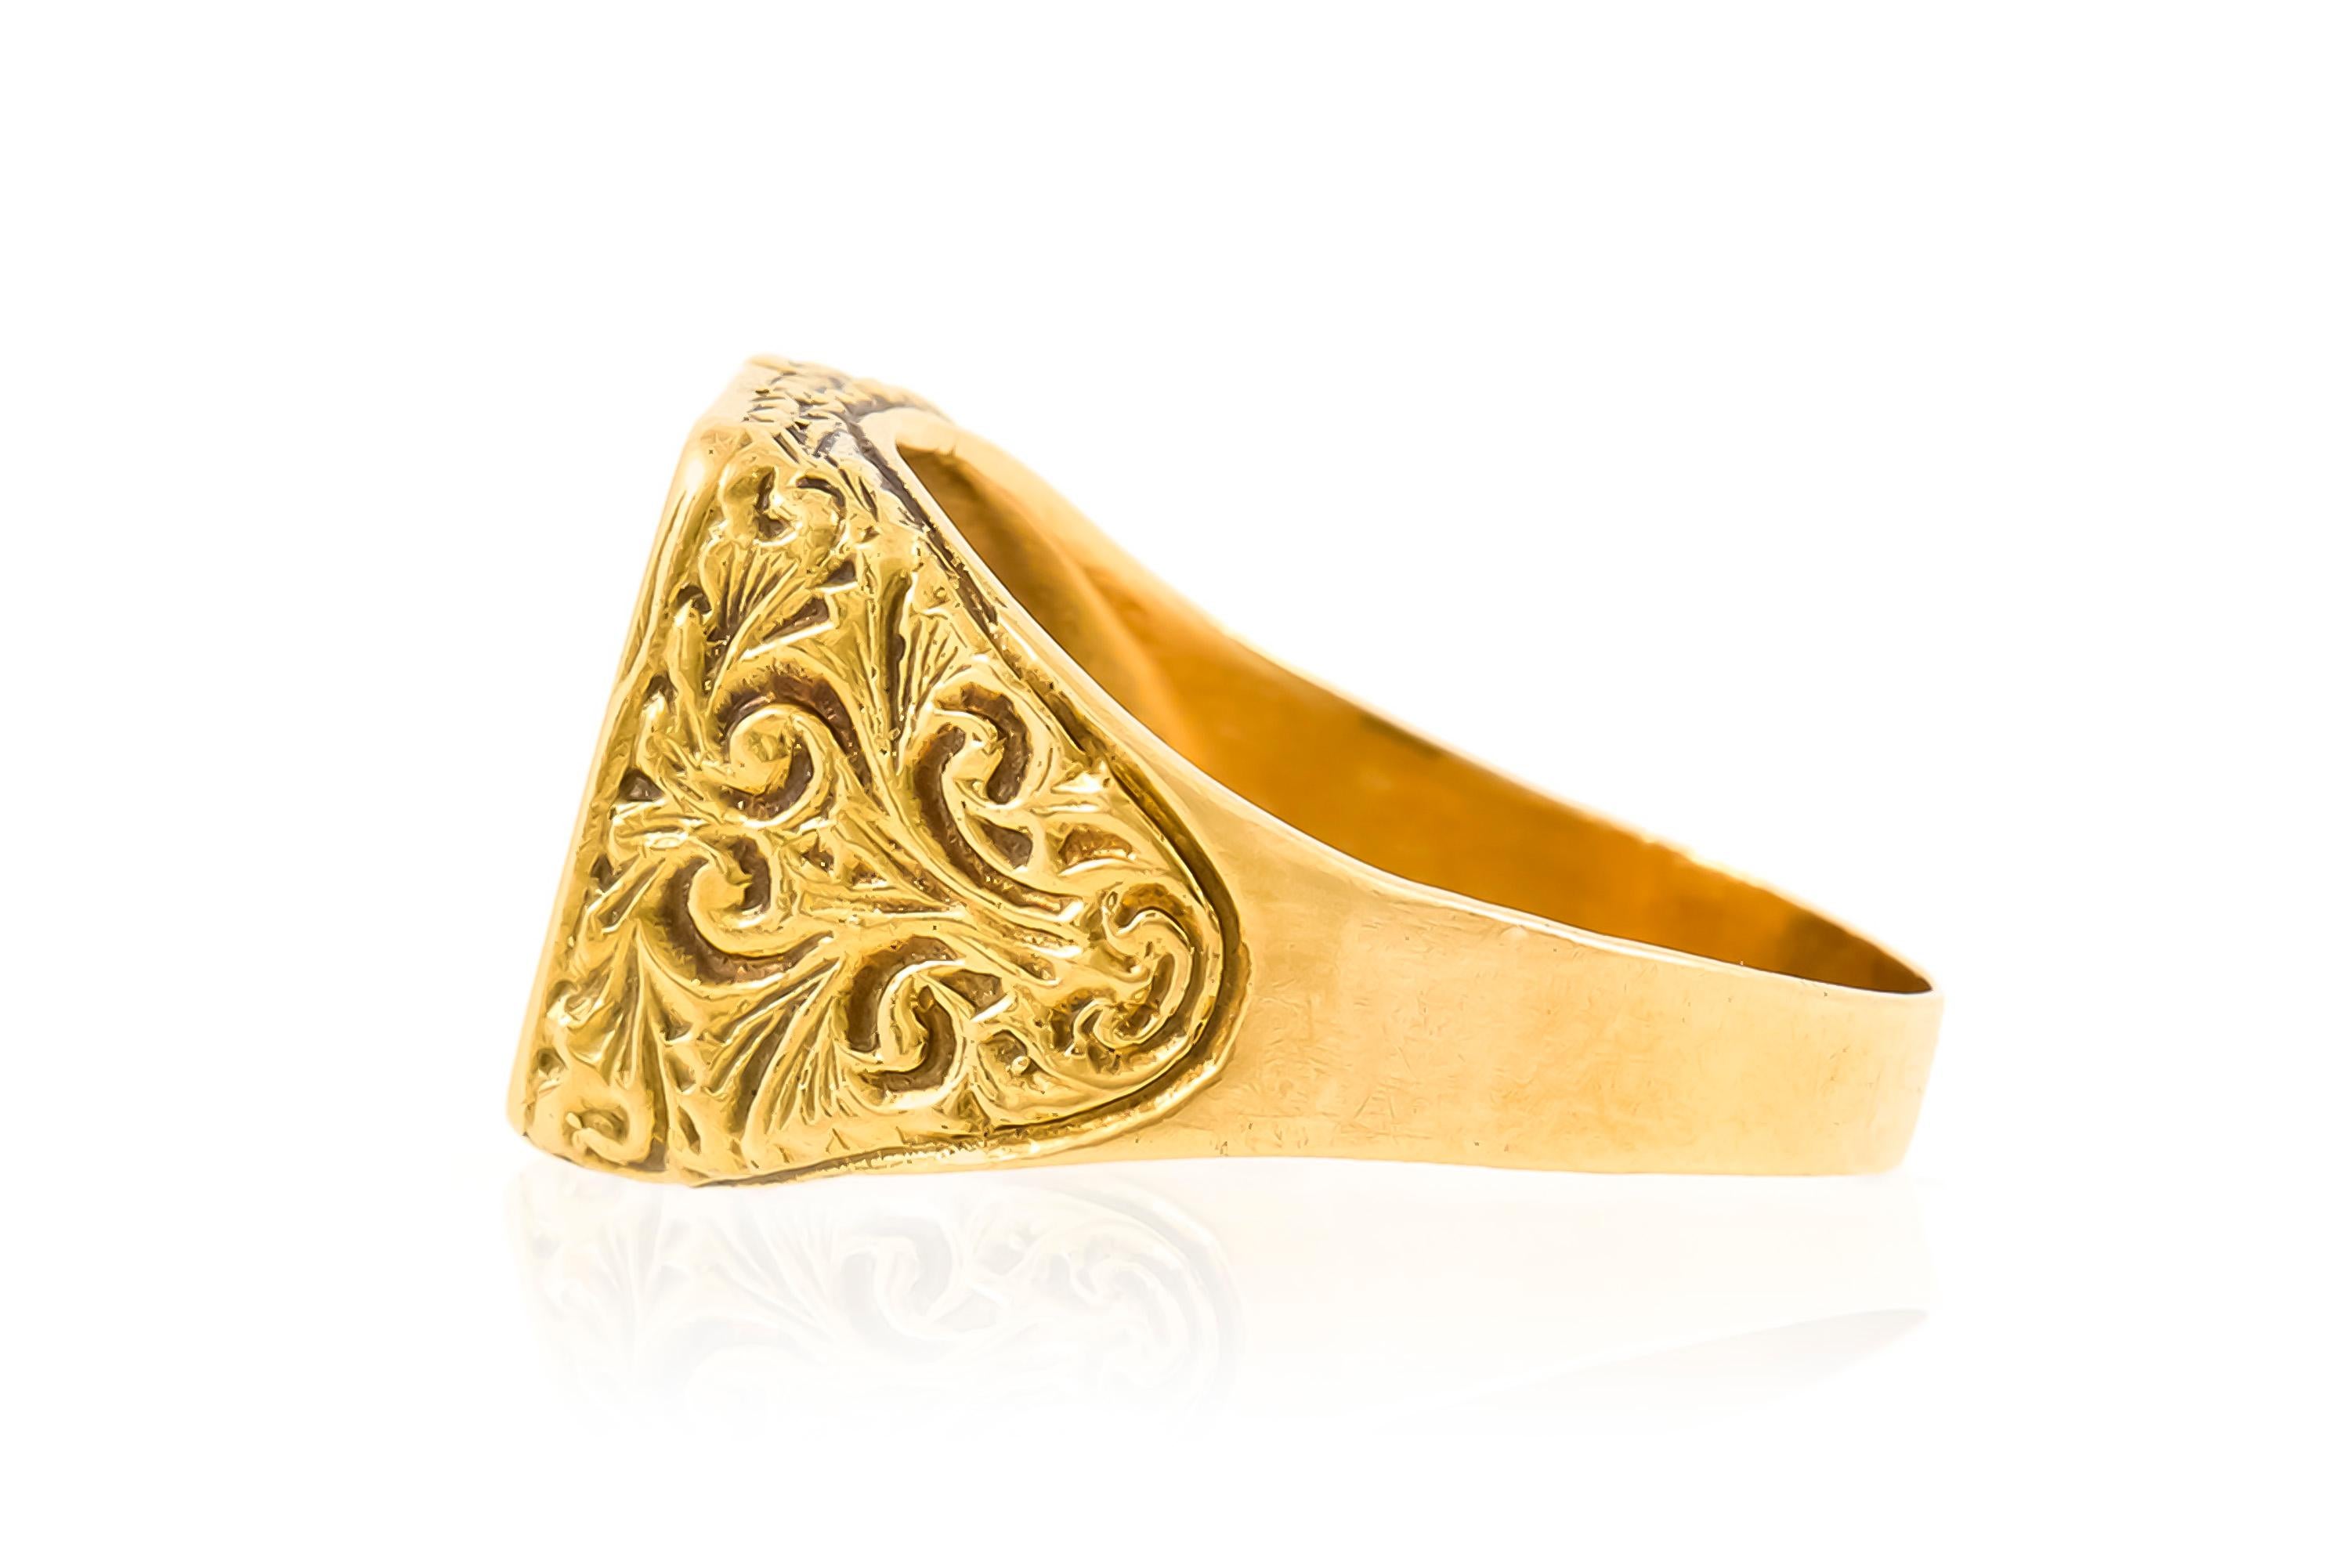 Finely crafted in 18k yellow gold and Blue Enamel.
The ring features a decorative egg design in the center and filigree on the sides.
Size 12 1/2, resizable
Victorian